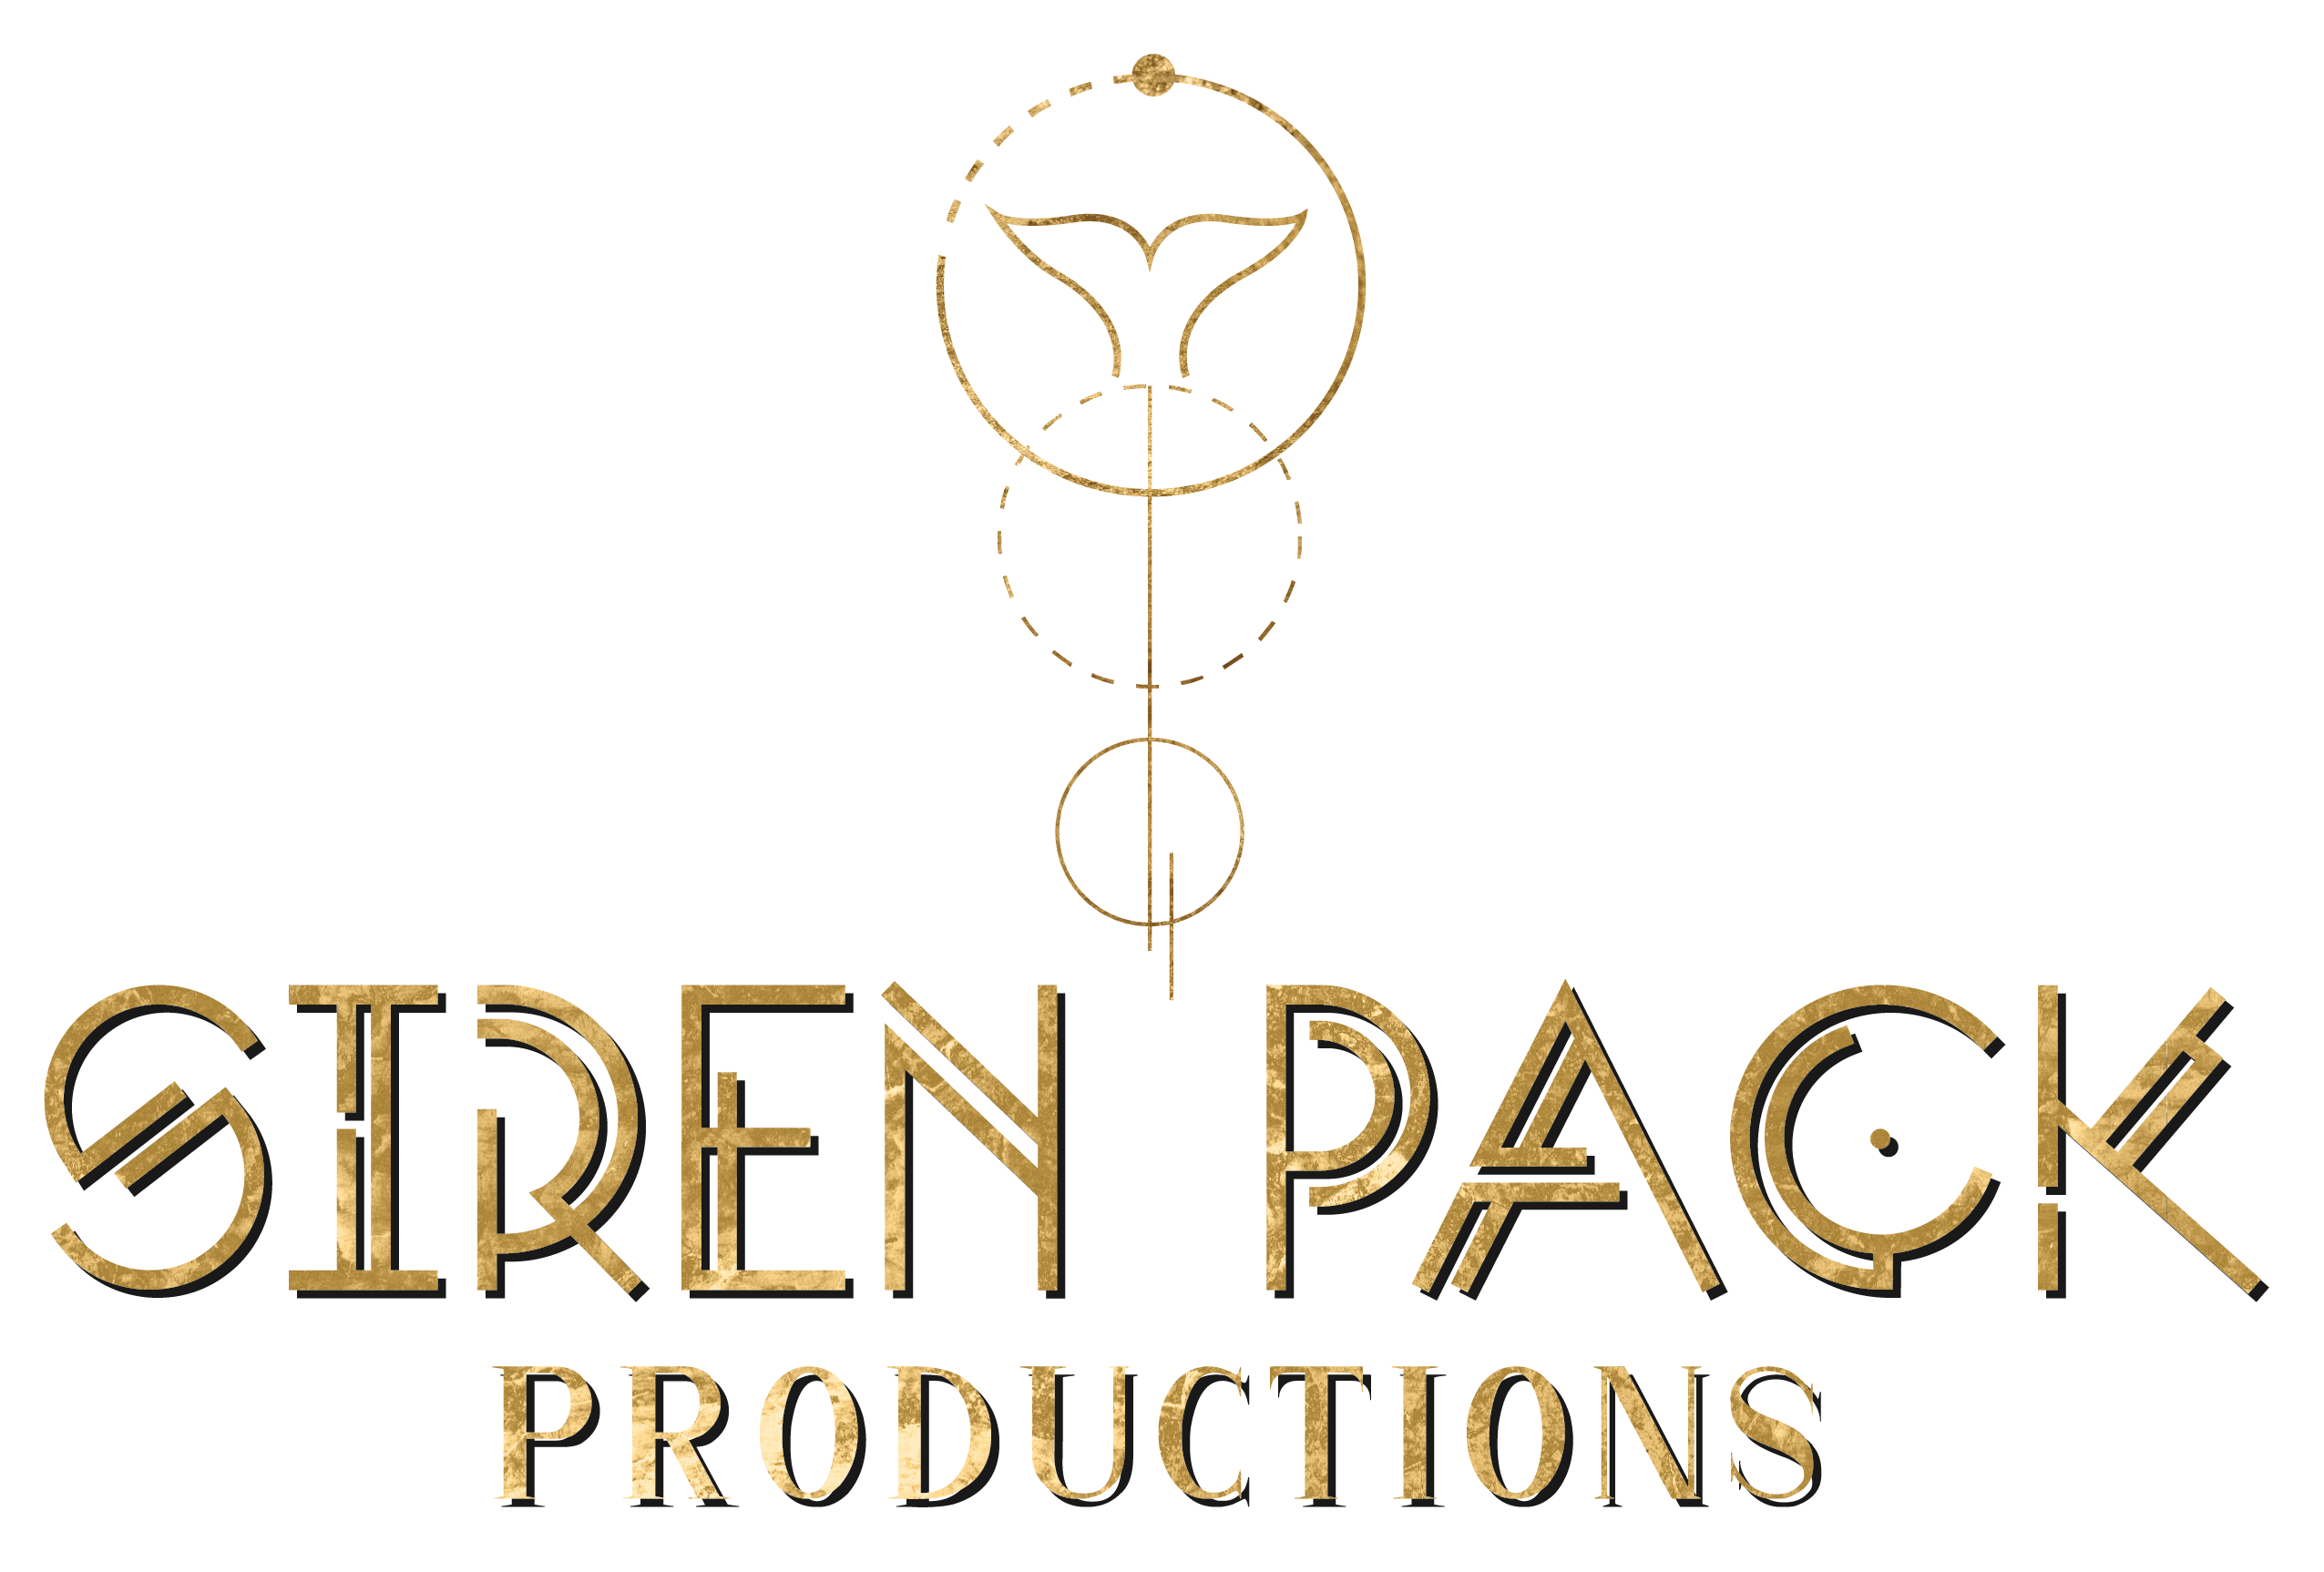 Siren Pack Productions